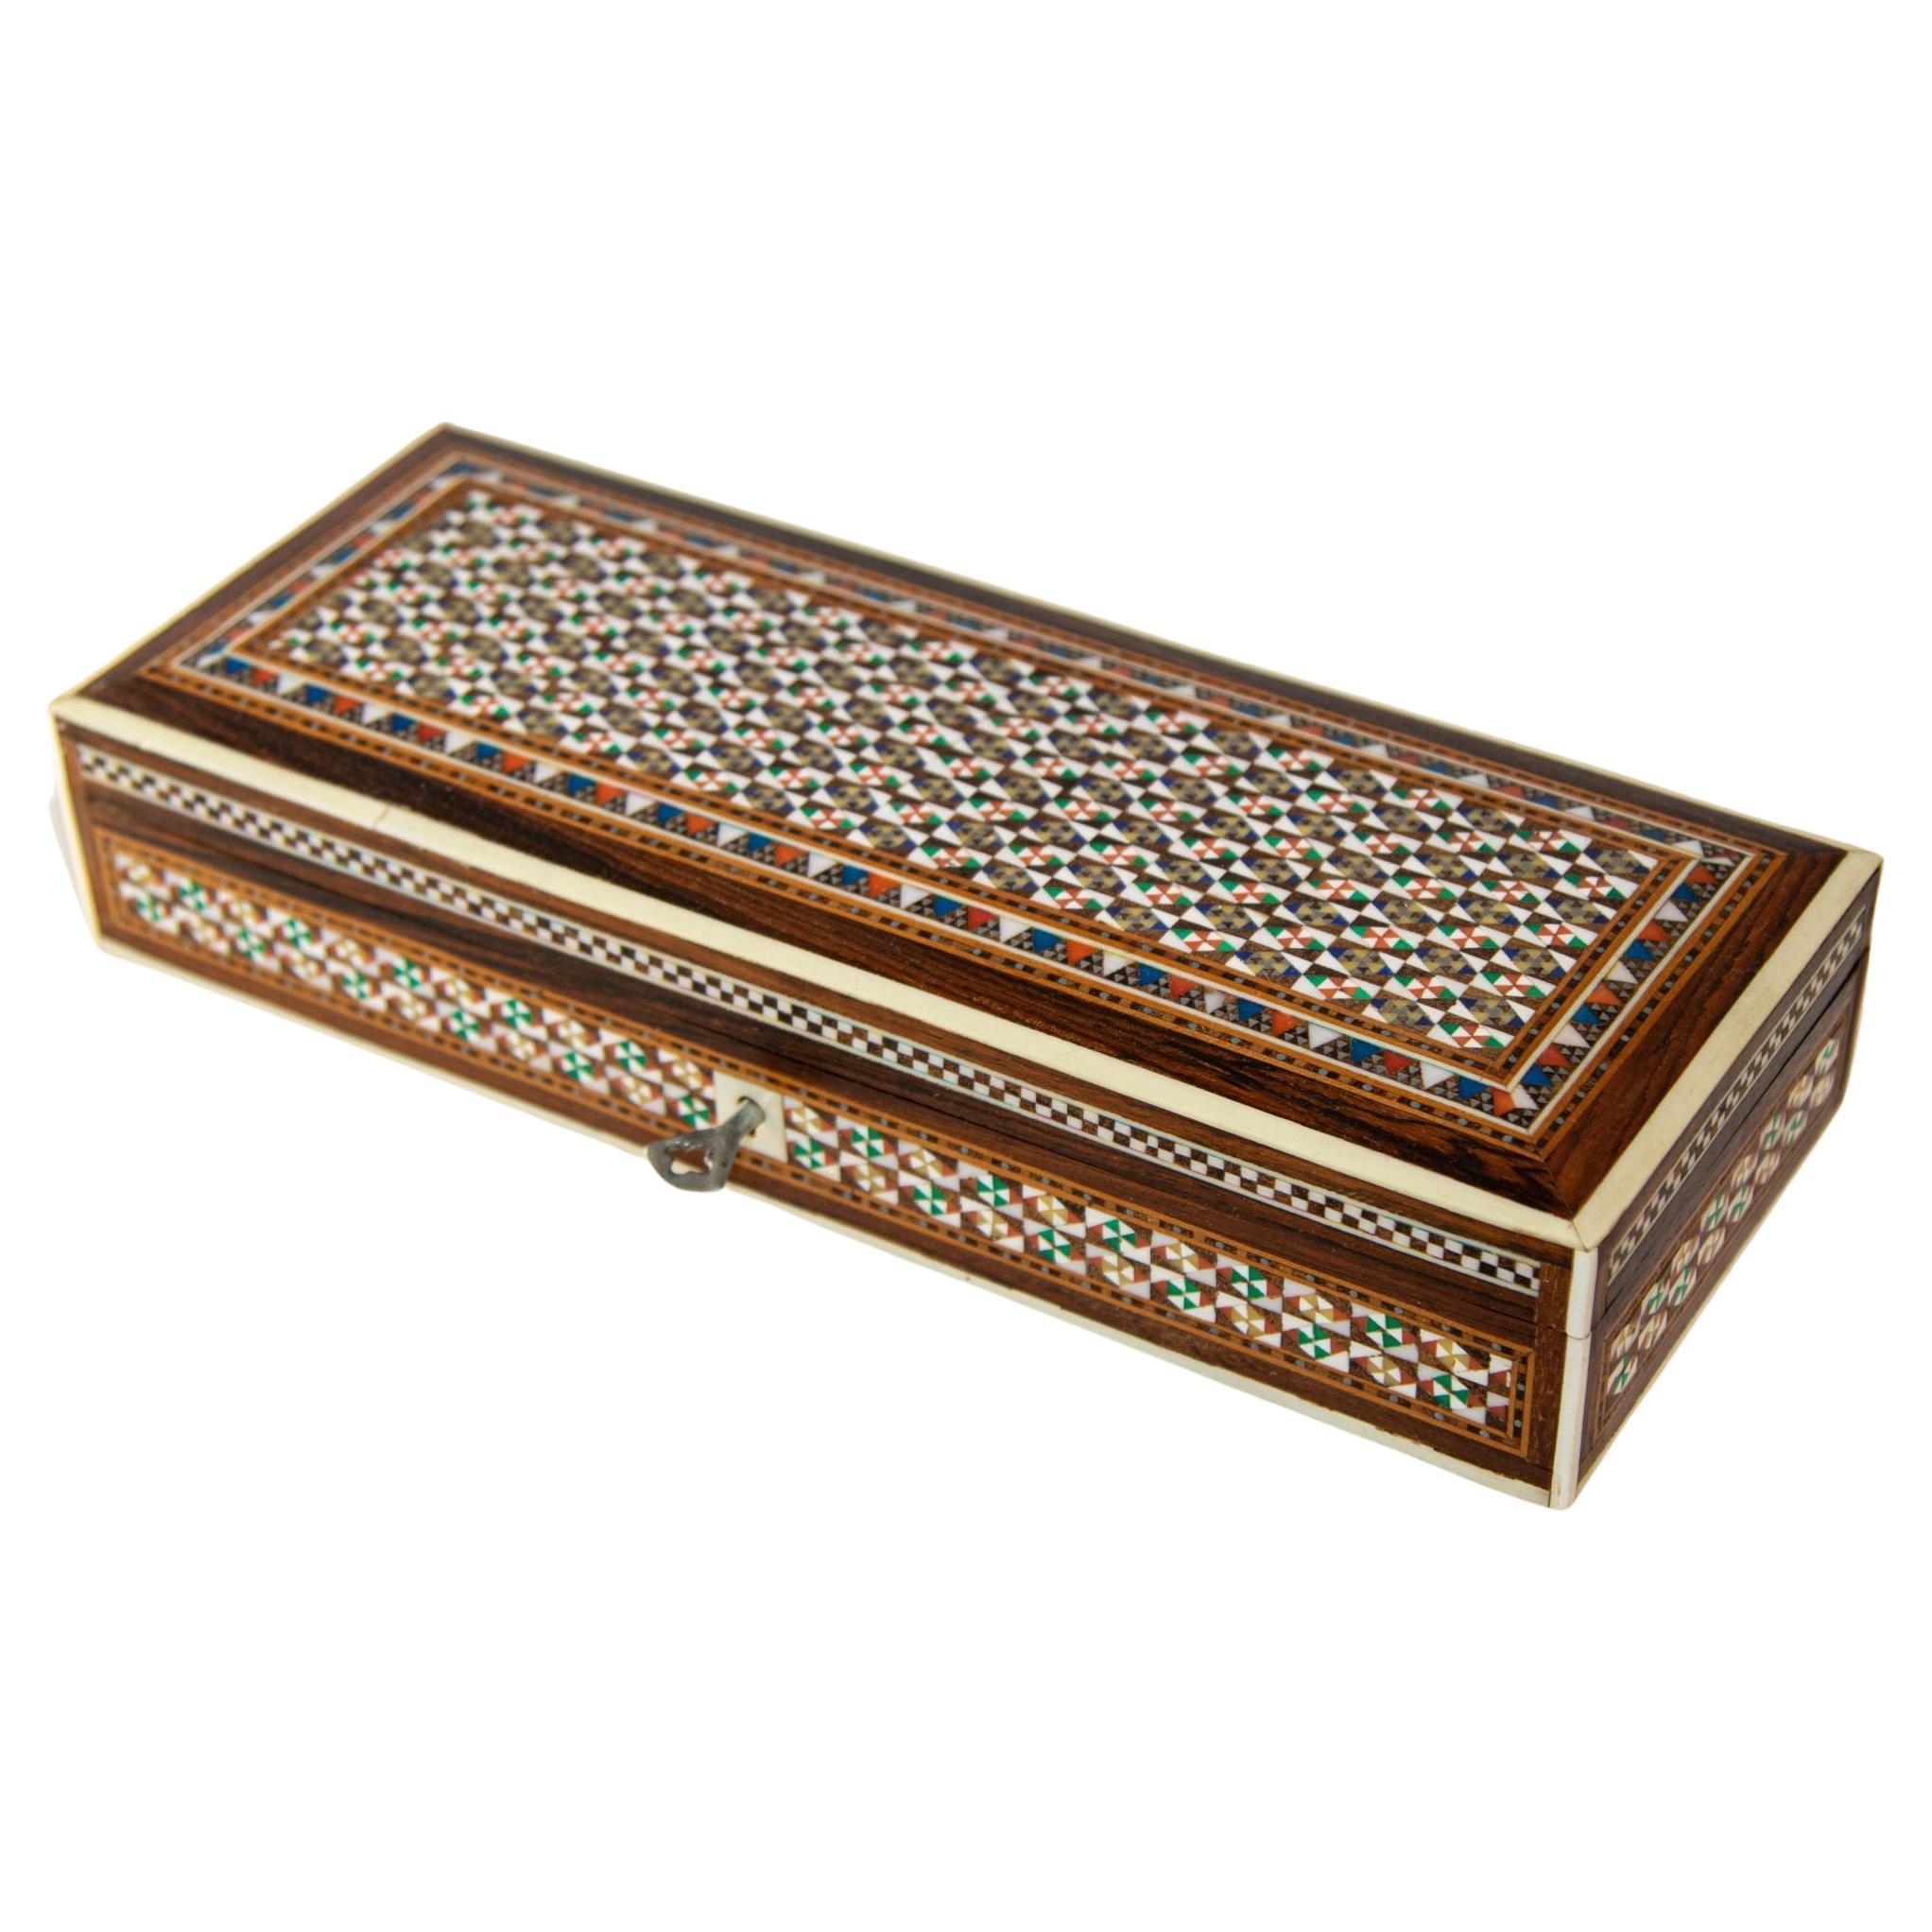 1950s Fine Handcrafted Syrian Mother-of-Pearl Inlay Box